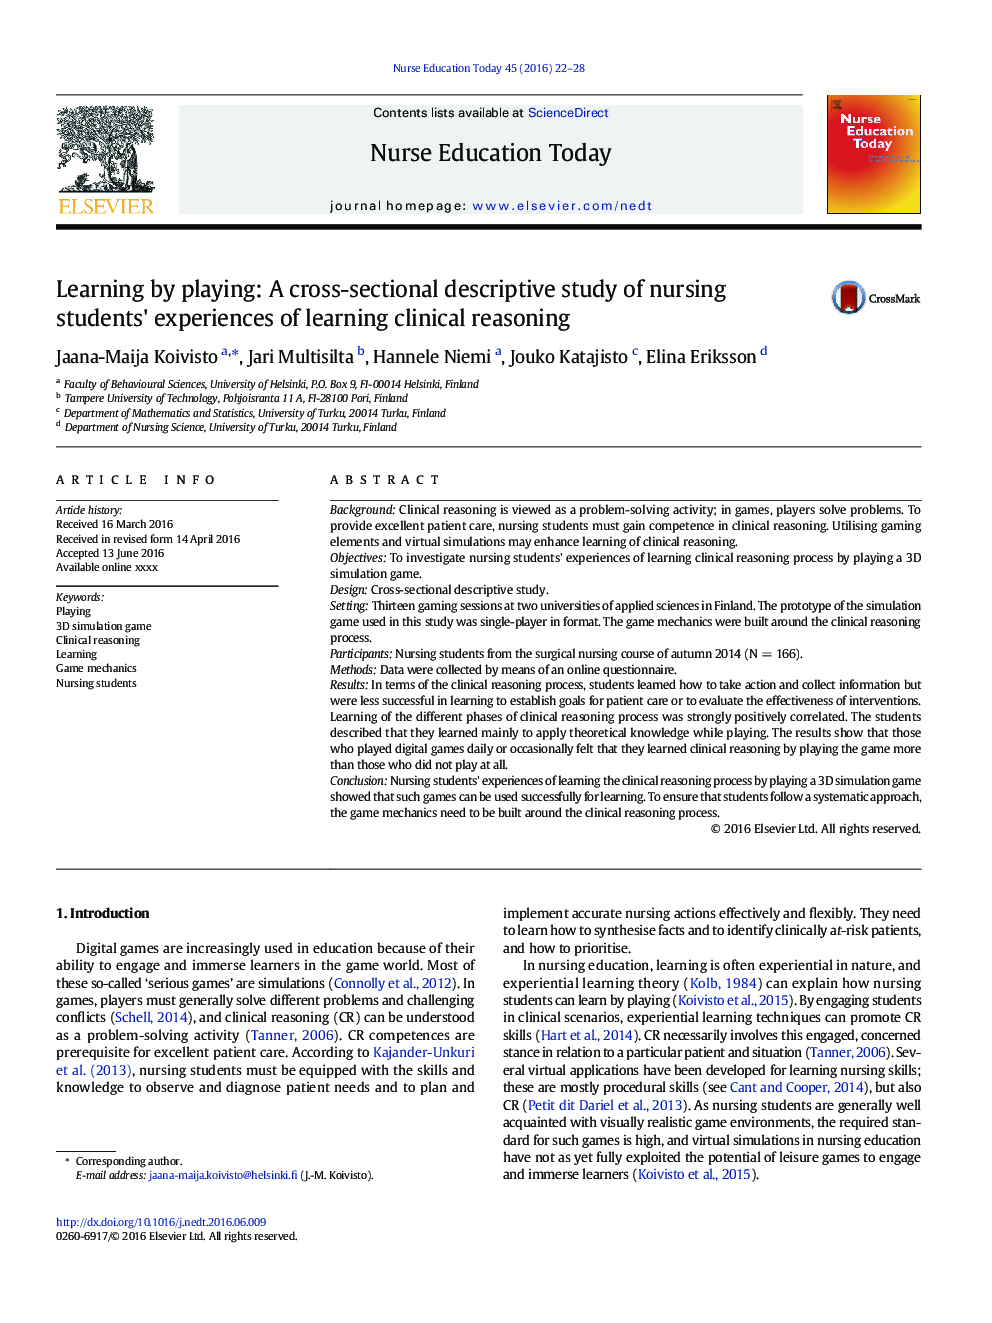 Learning by playing: A cross-sectional descriptive study of nursing students' experiences of learning clinical reasoning